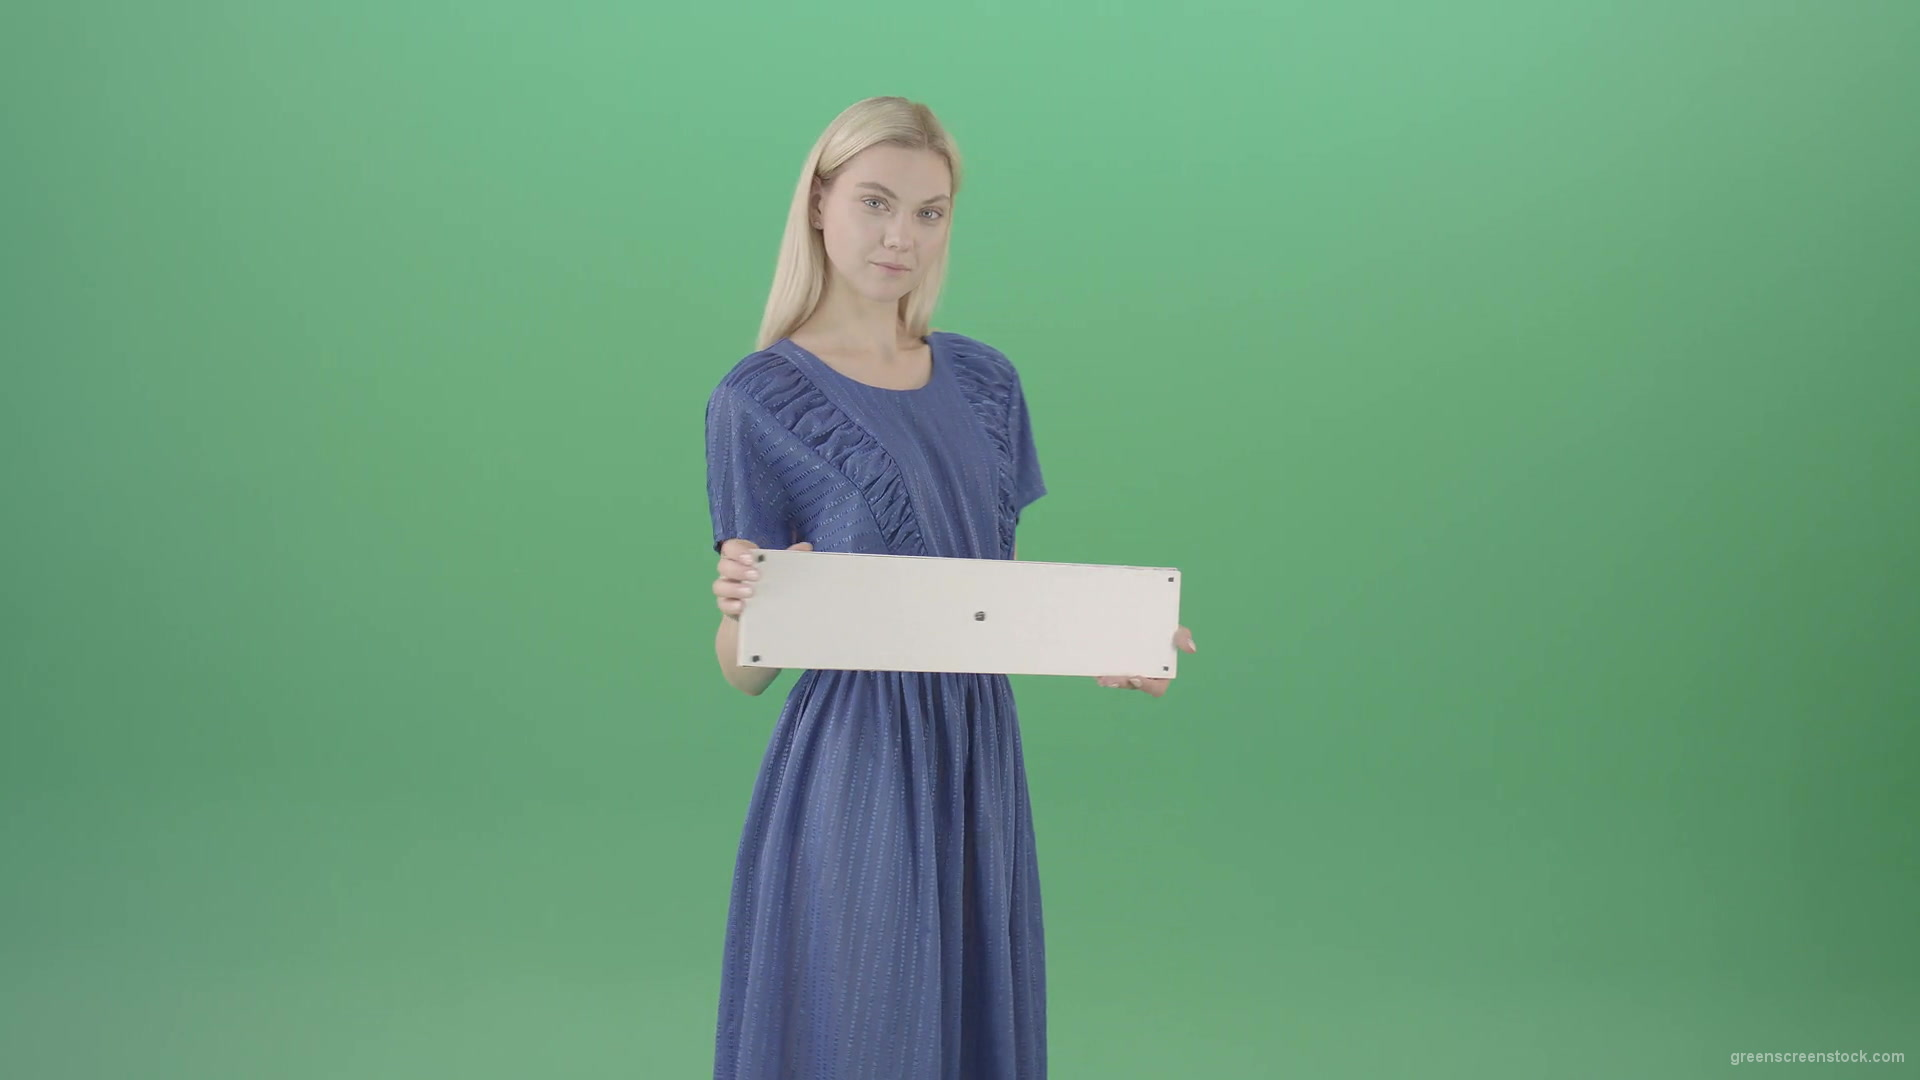 Elegant-Woman-in-blue-dress-posing-with-advertisment-text-plane-mockup-and-posing-isolated-on-Green-Screen-4K-Video-Footage-1920_008 Green Screen Stock